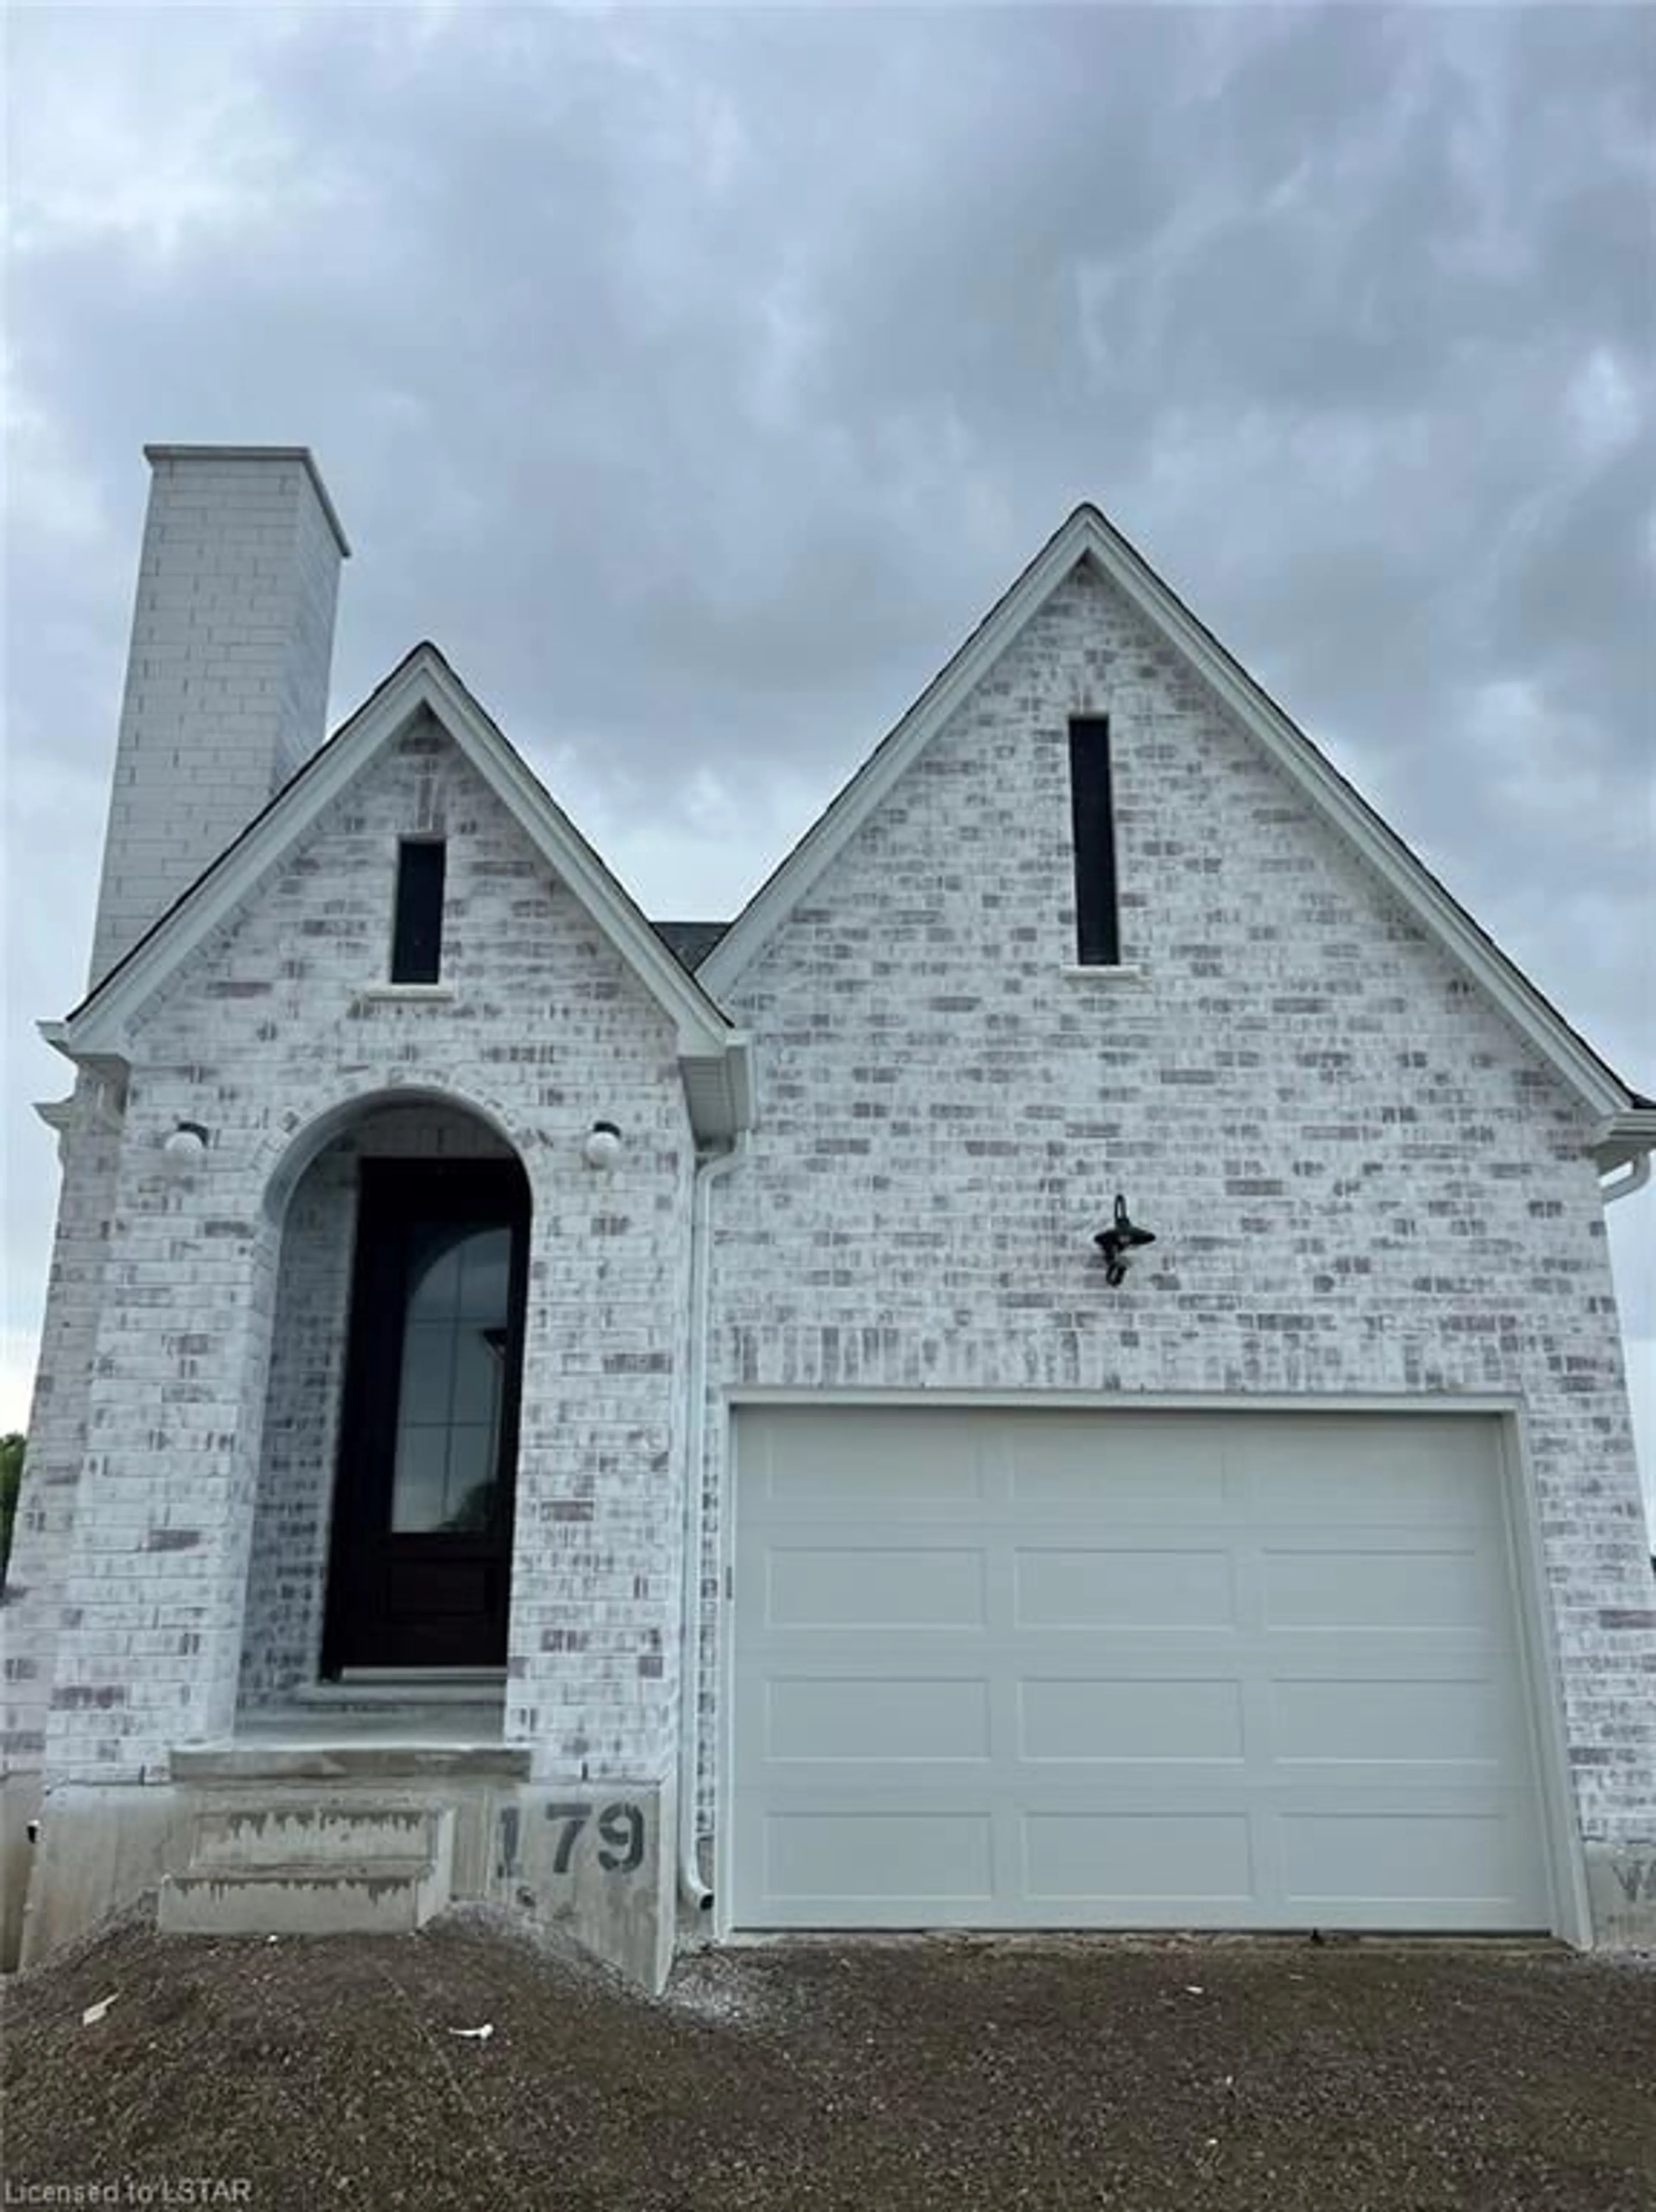 Home with brick exterior material for LOT 179 Royal Magnolia Ave, London Ontario N6P 0H2